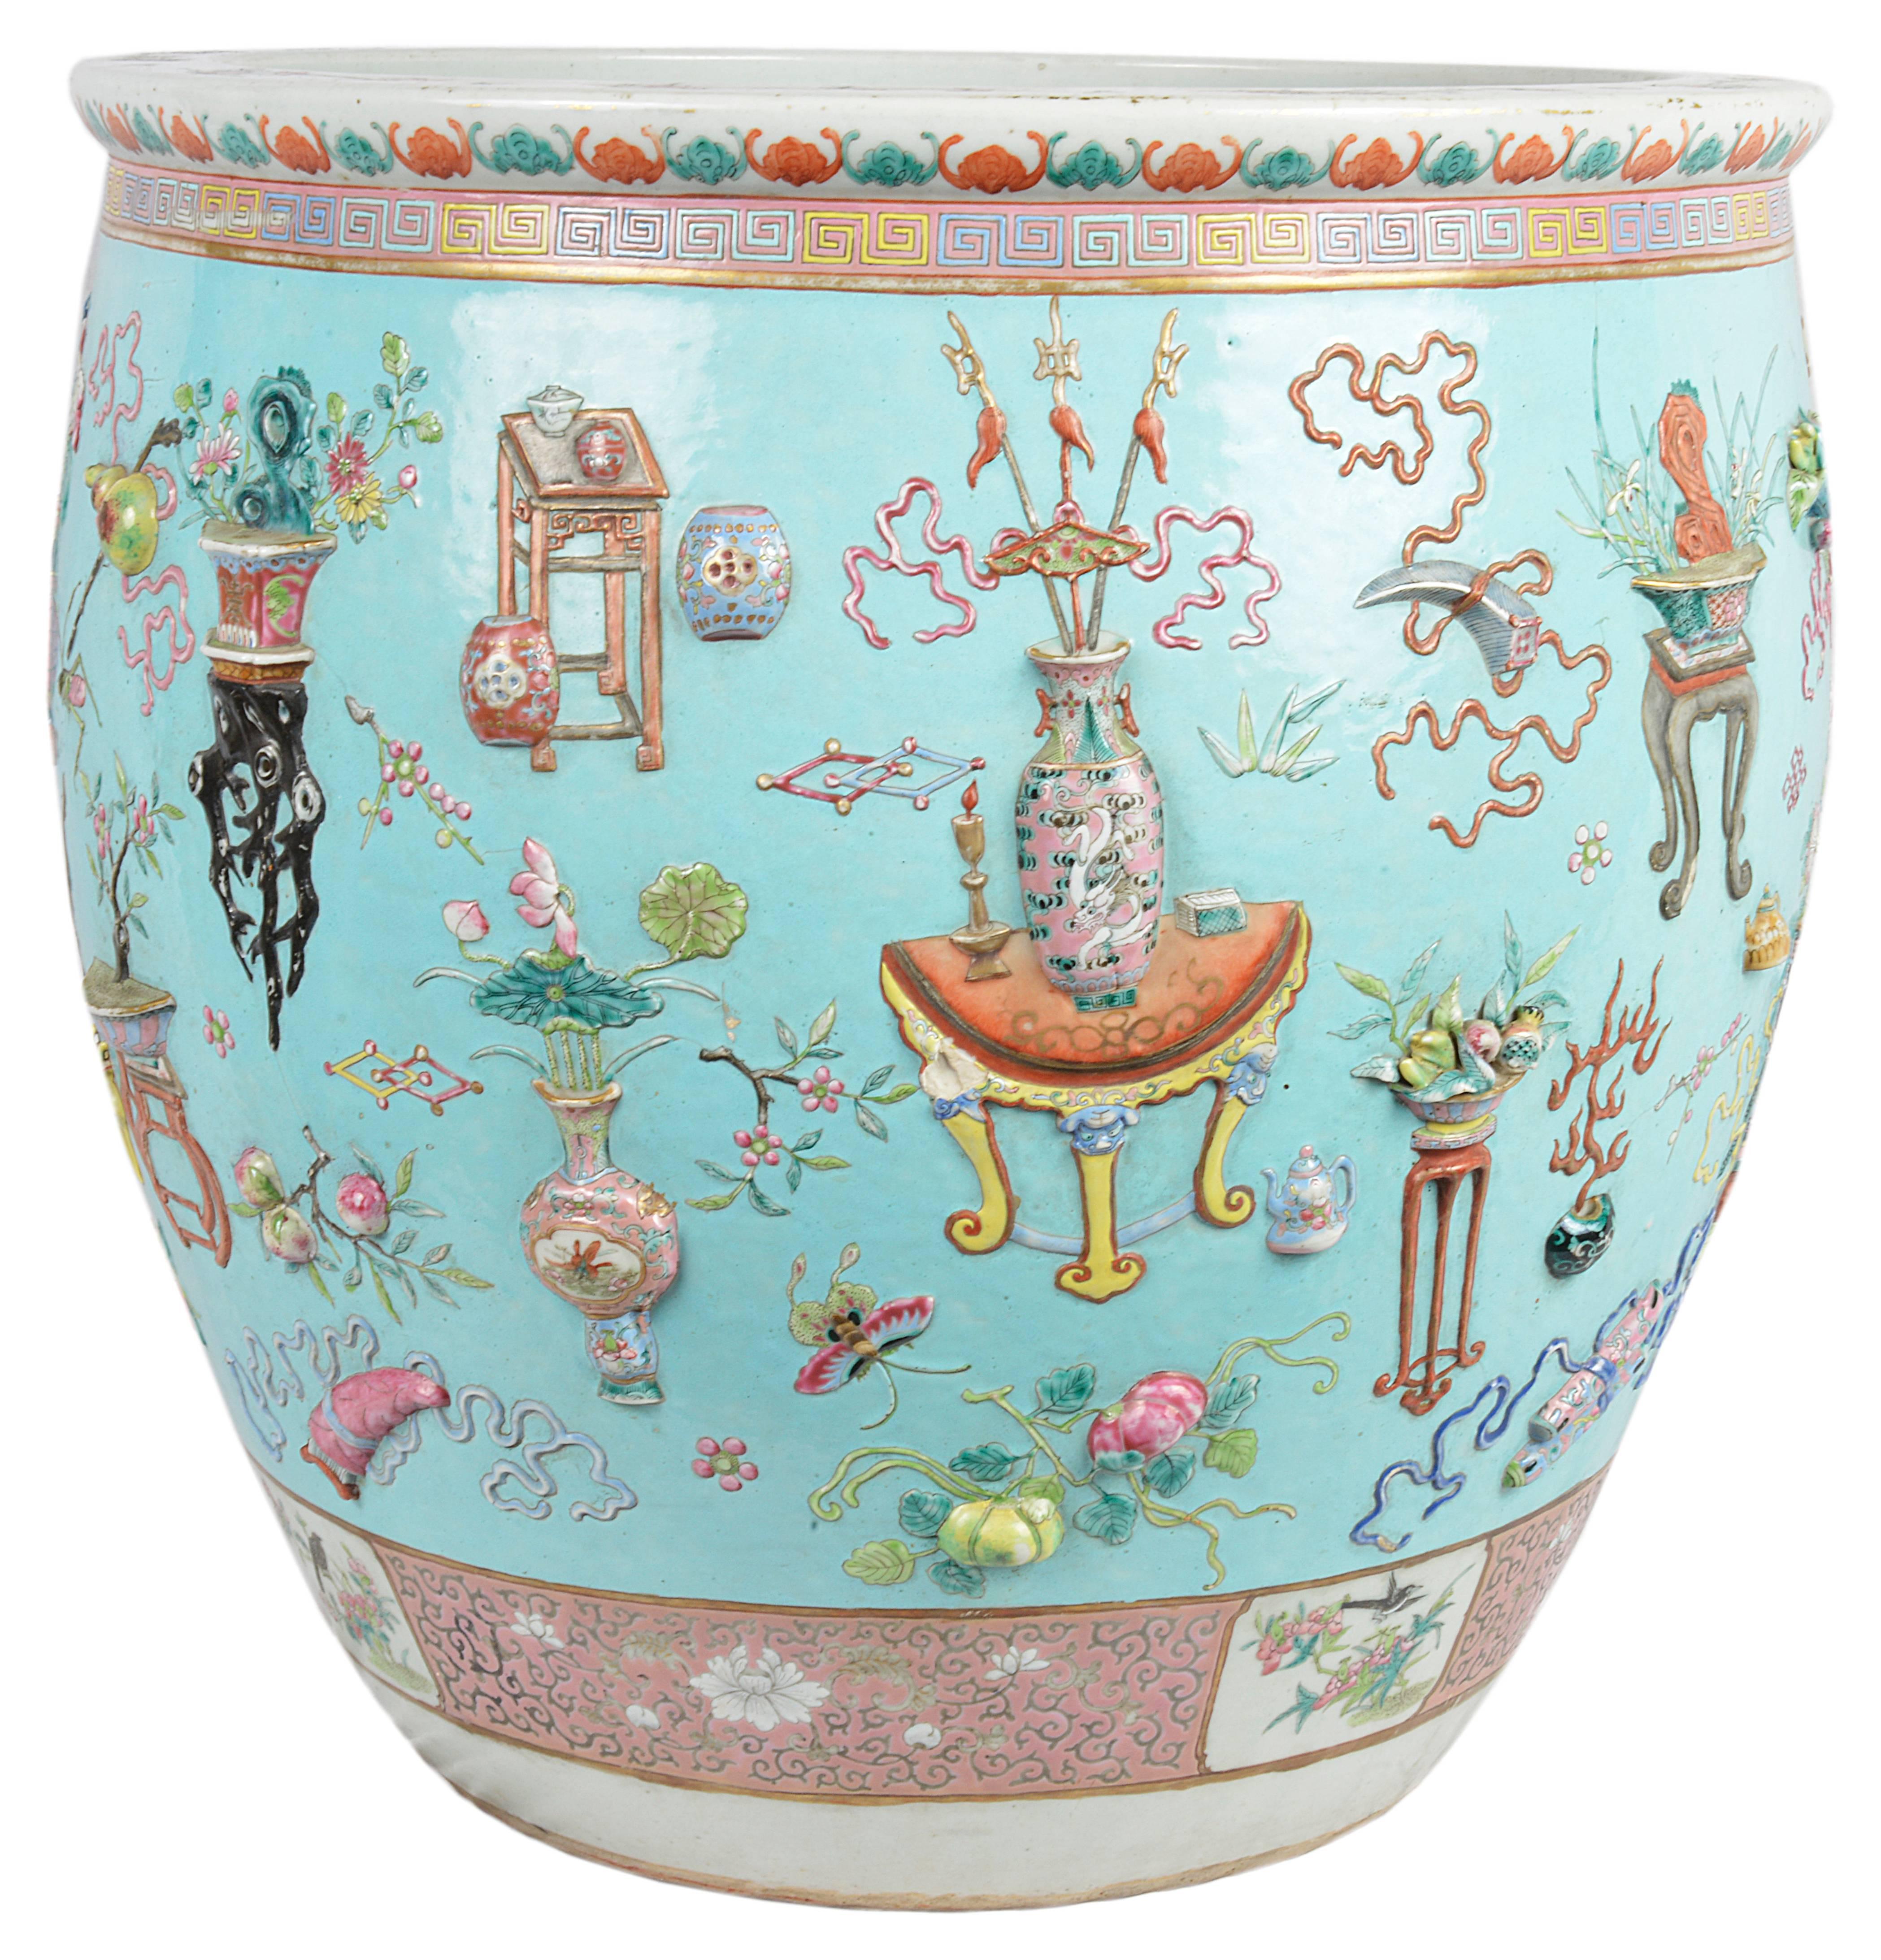 Very good quality 19th century Chinese Famille Rose fish bowl. Having a wonderful selection of raised, hand-painted vases, lanterns, furniture, flowers and motifs set on a turquoise back ground and a pink patterns boarder top and bottom. The